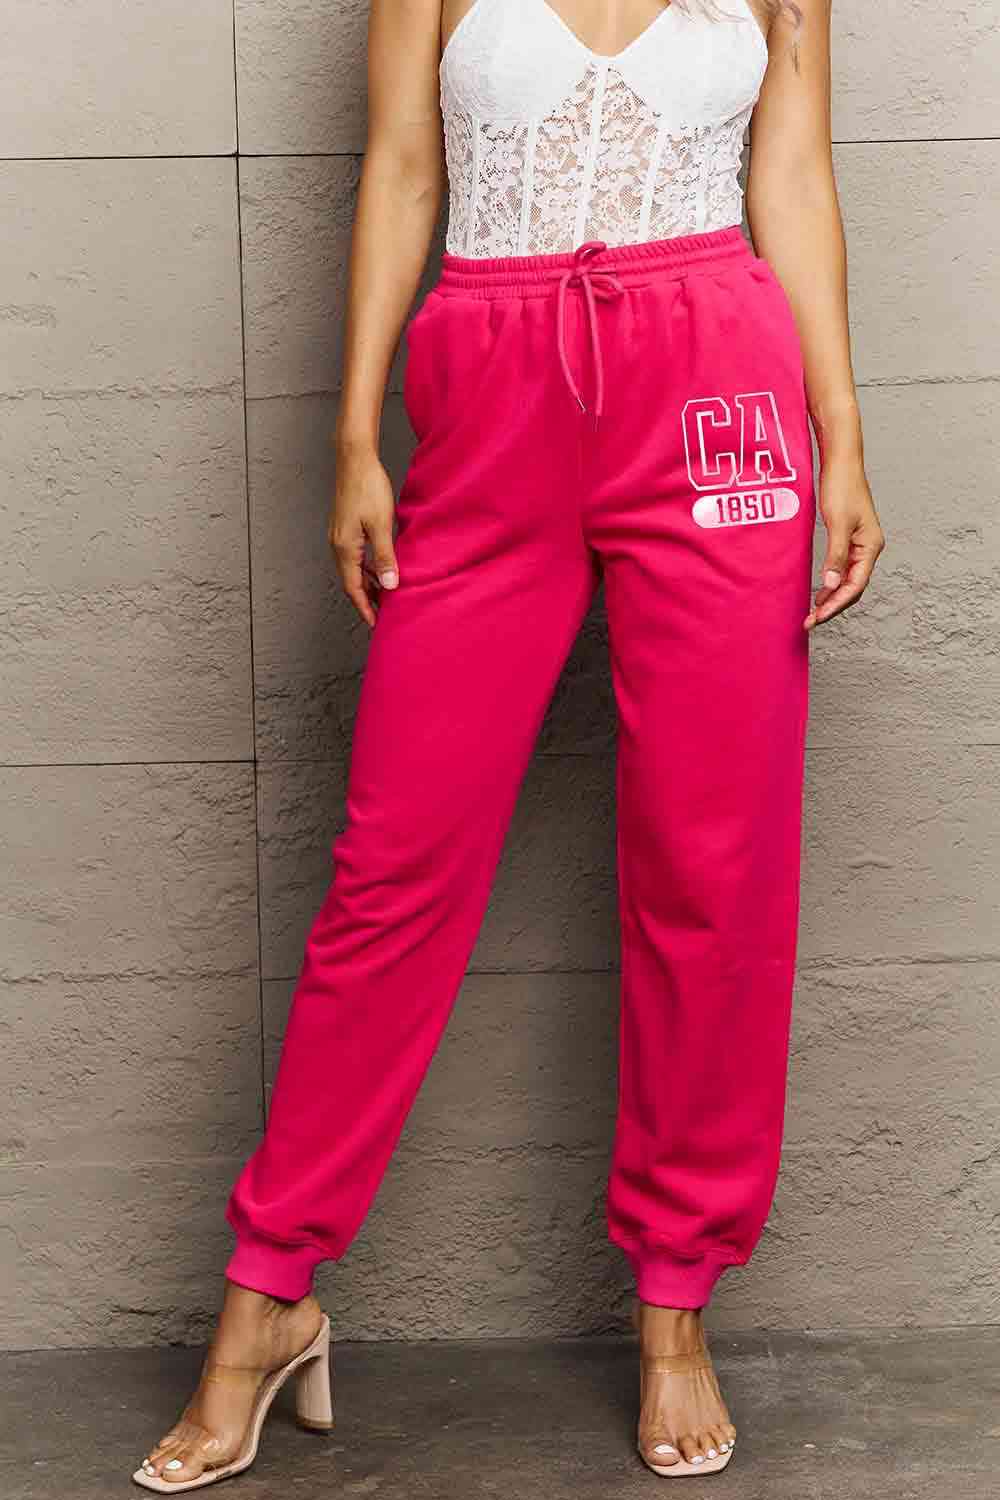 Simply Love Simply Love Full Size CA 1850 Graphic Joggers Hot Pink